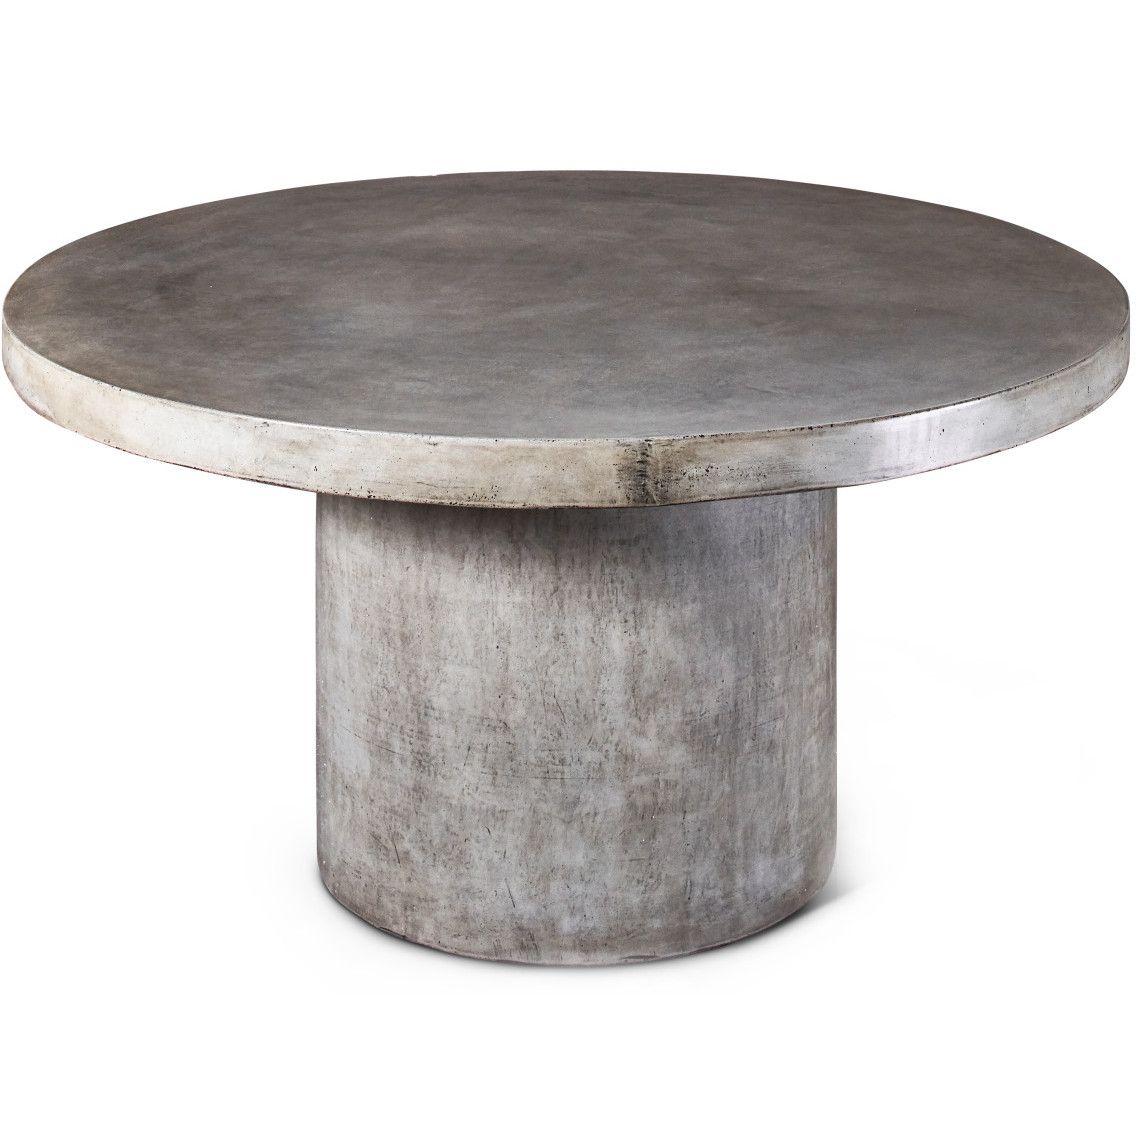 side table probably outrageous unbelievable end bases wood round concrete dining hometty jig bedside cabinet locker nightstand queen anne furniture legs small black outdoor red